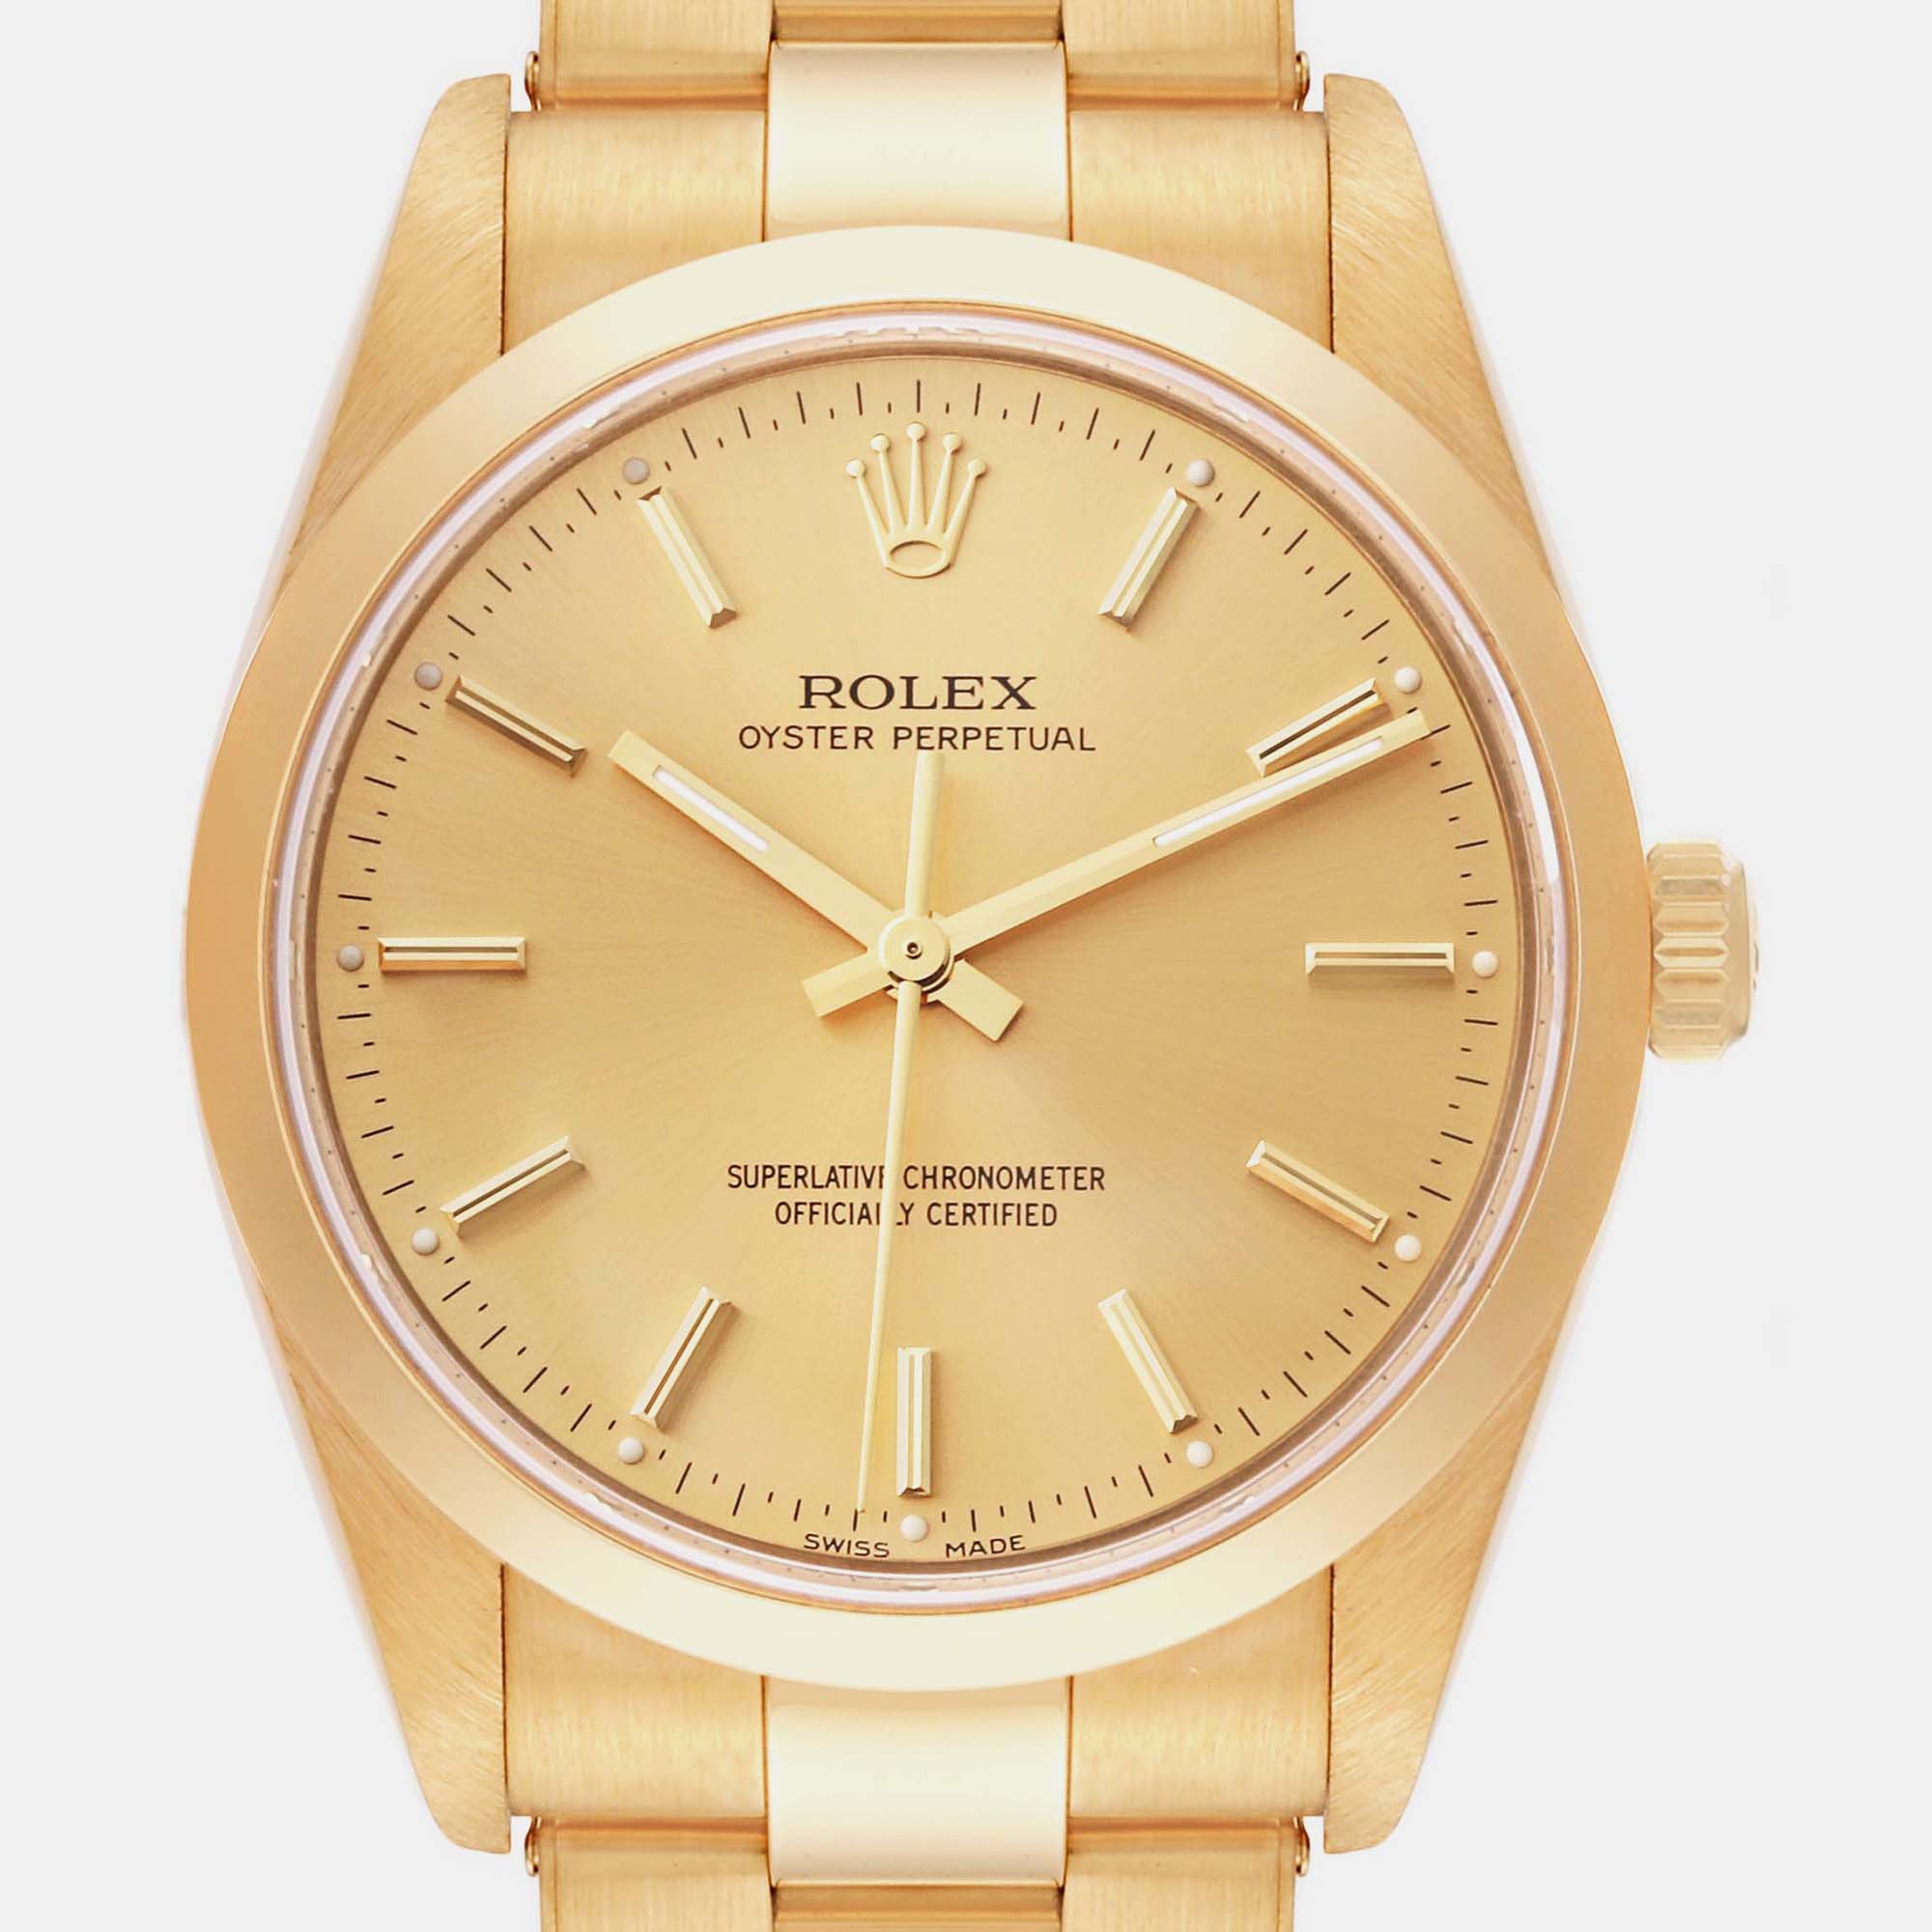 Rolex Oyster Perpetual Champagne Dial Yellow Gold Men's Watch 14208 34 Mm